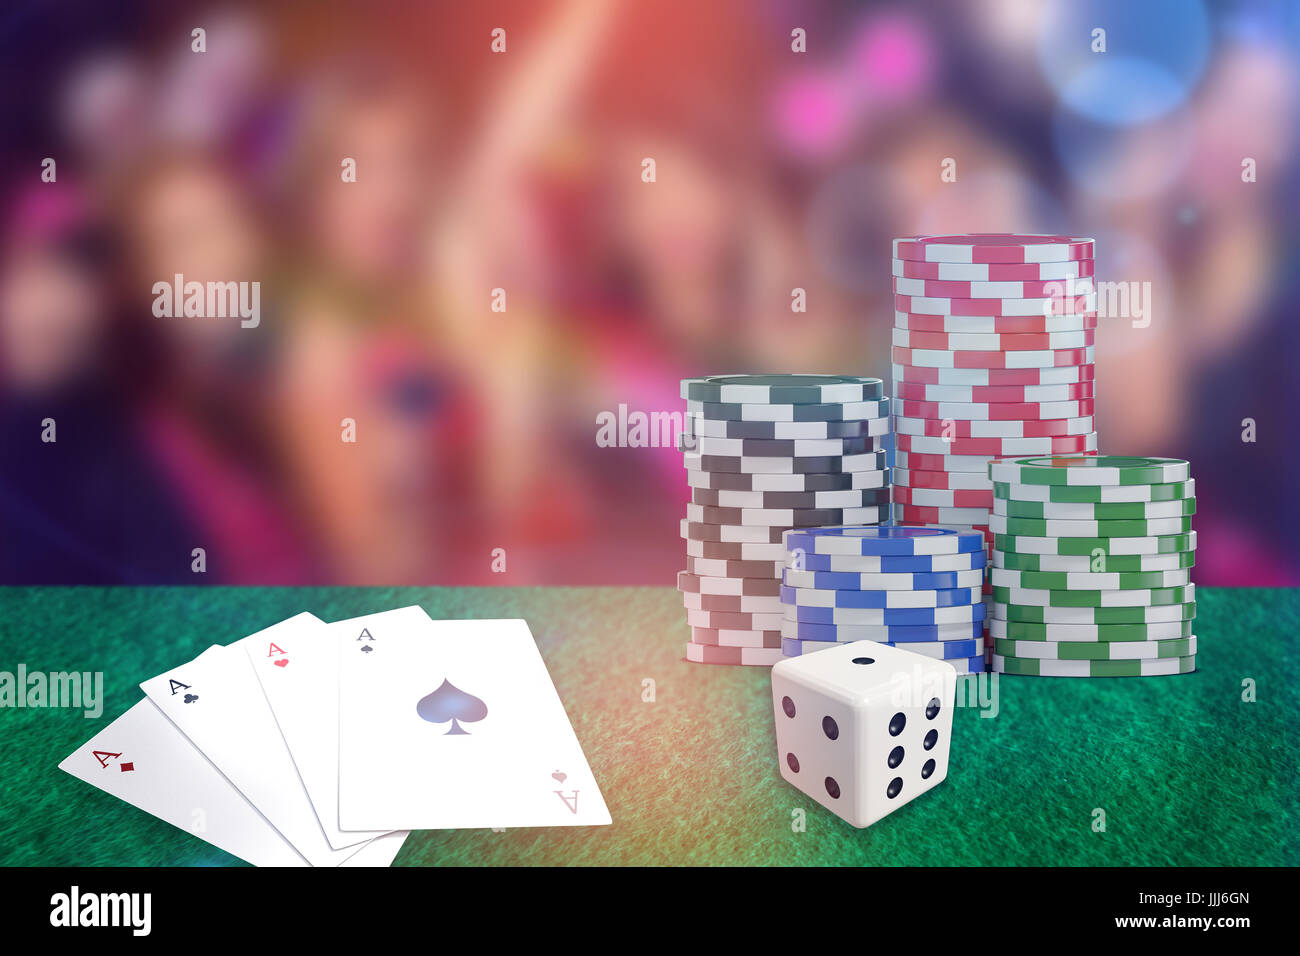 Composite 3d image of digital image of red dice Stock Photo